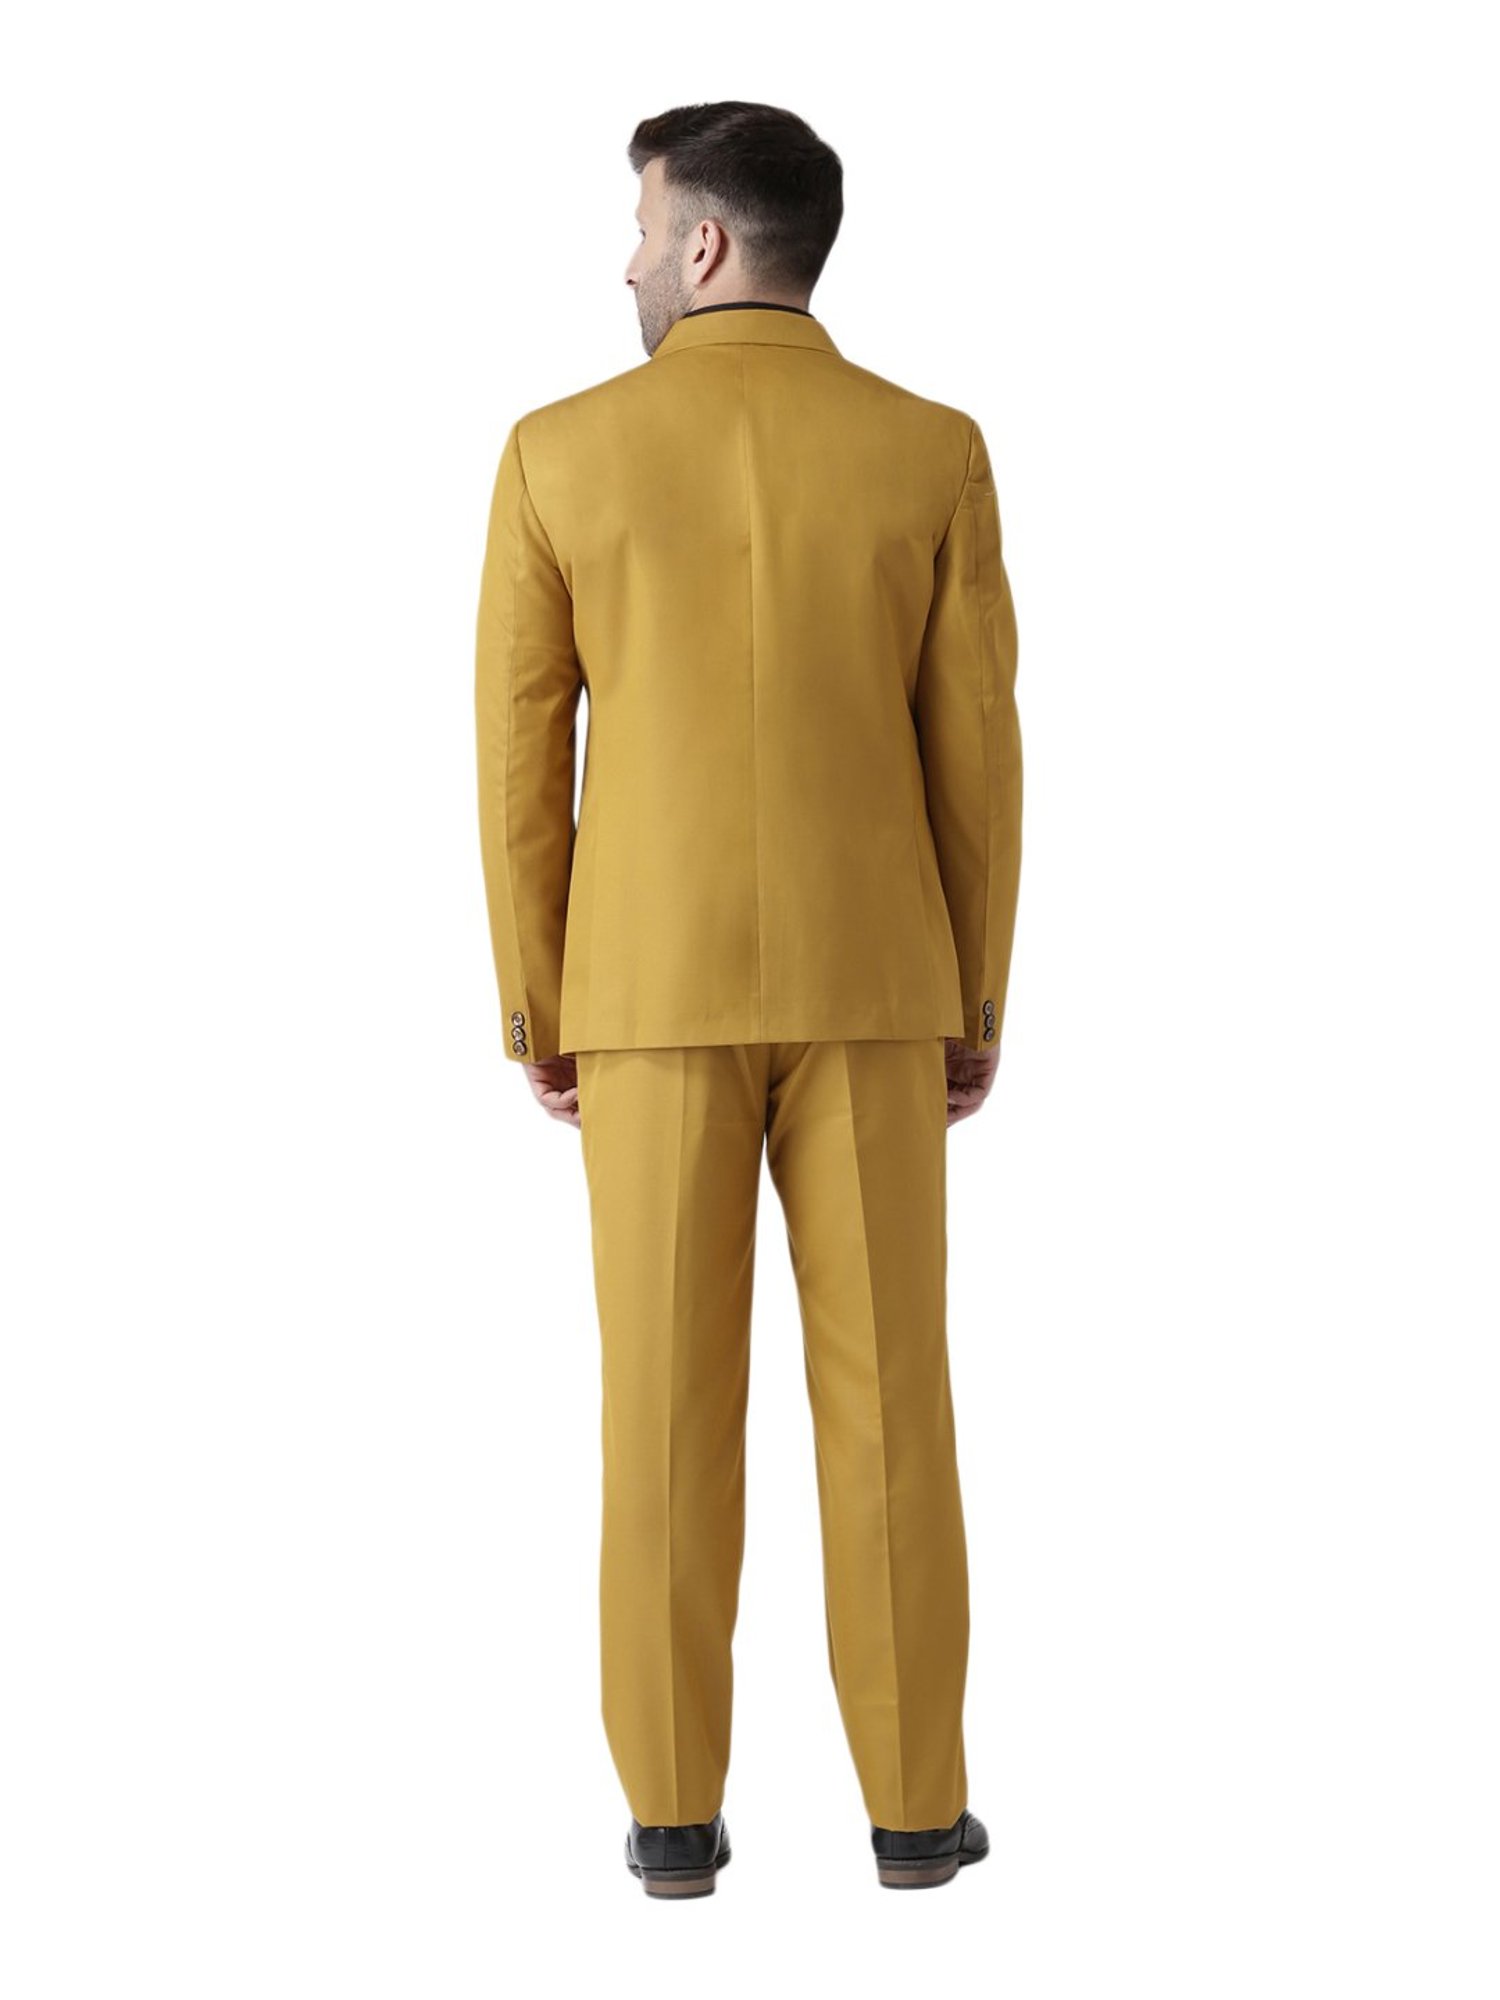 Kimi Yellow Peaked Lapel Double Breasted Stylish Men Suits | Allaboutsuit